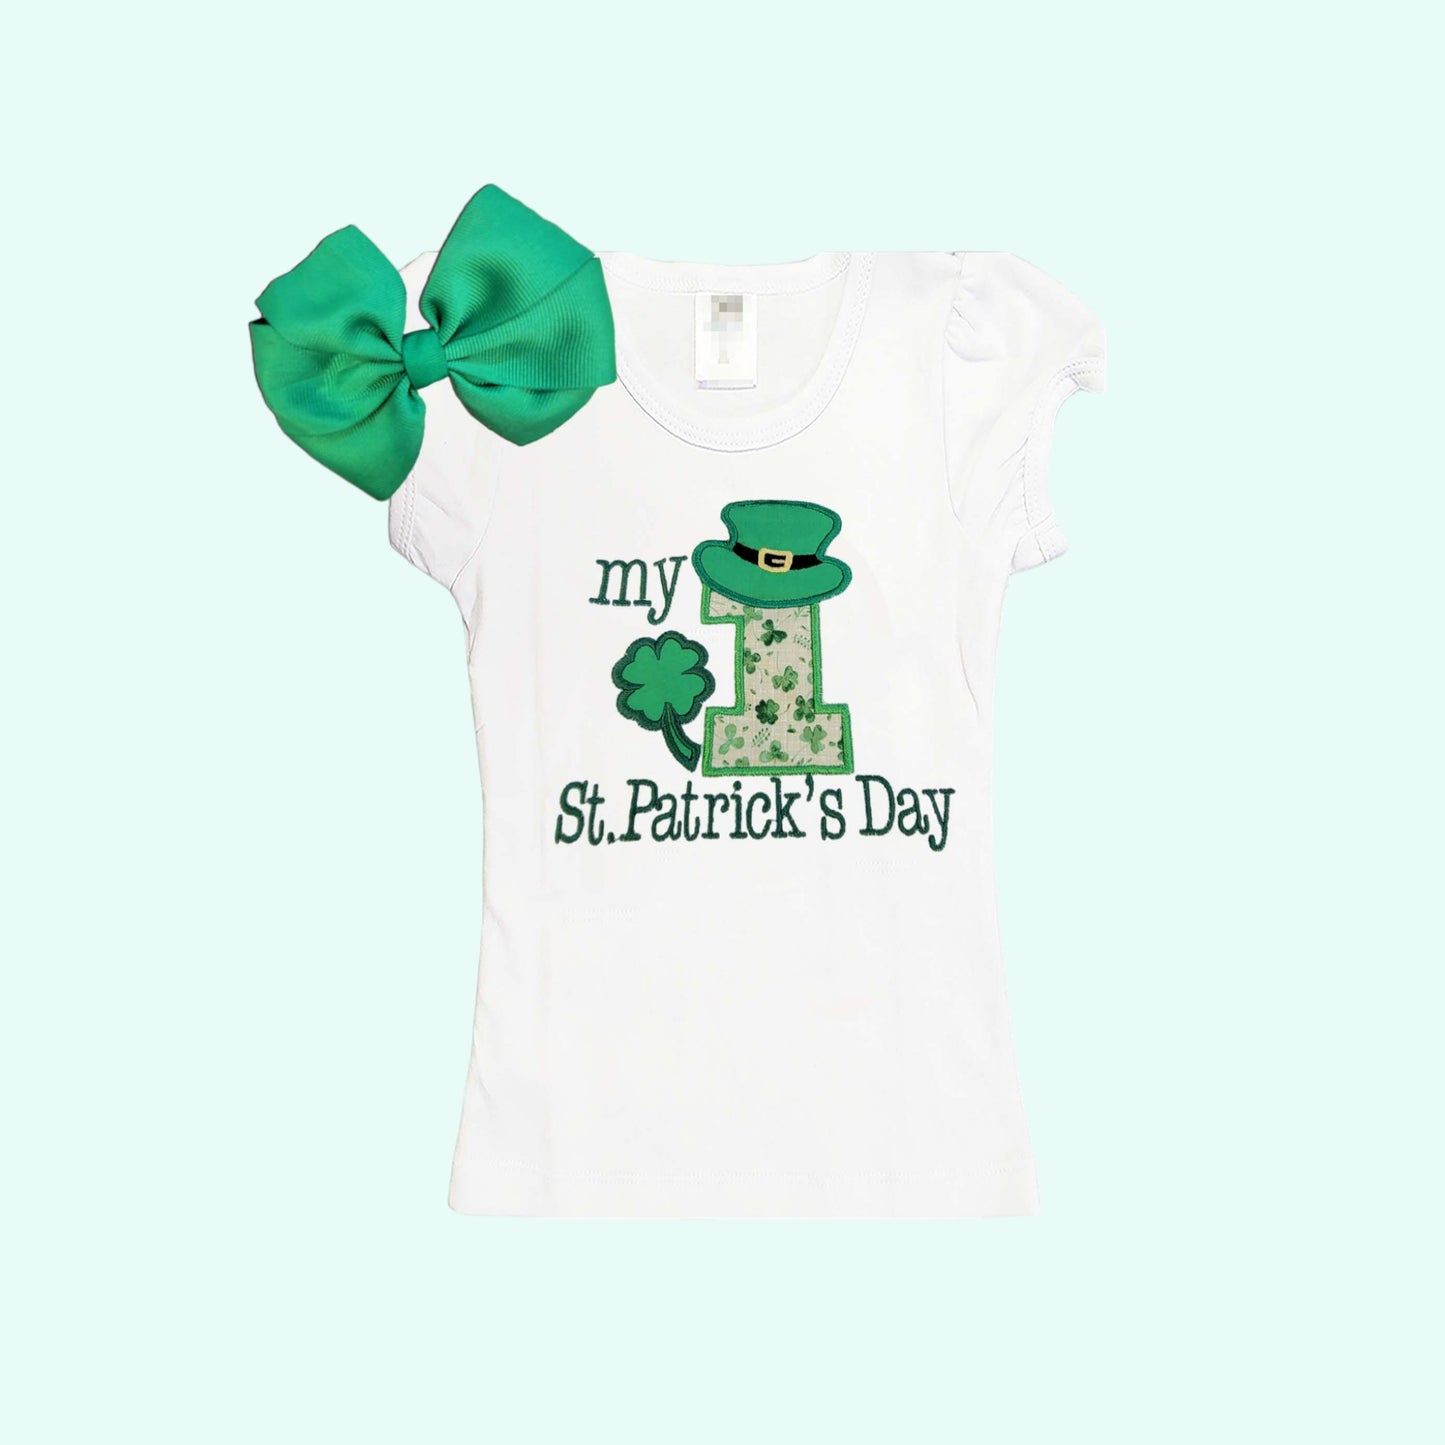 St. Patrick Day Outfit, My First St Patrick Day, Girls St. Patrick Day Shirt - Skirt, Baby St Patrick Day Set, Shamrock Outfit for Girls